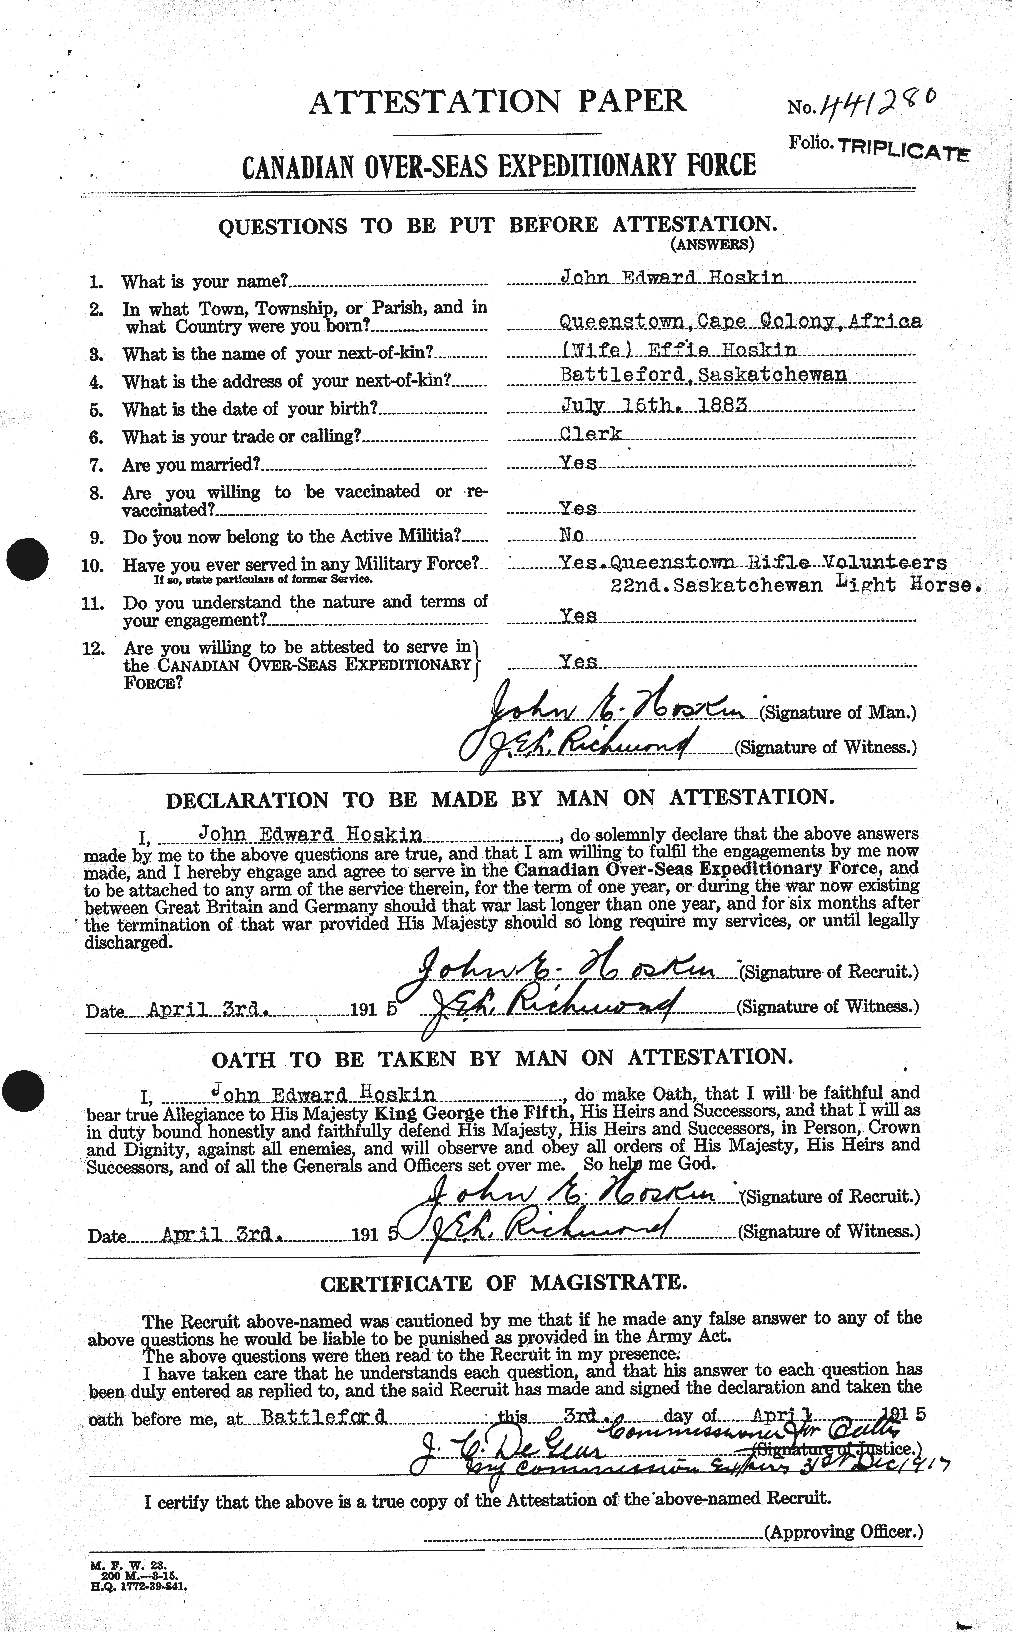 Personnel Records of the First World War - CEF 400057a